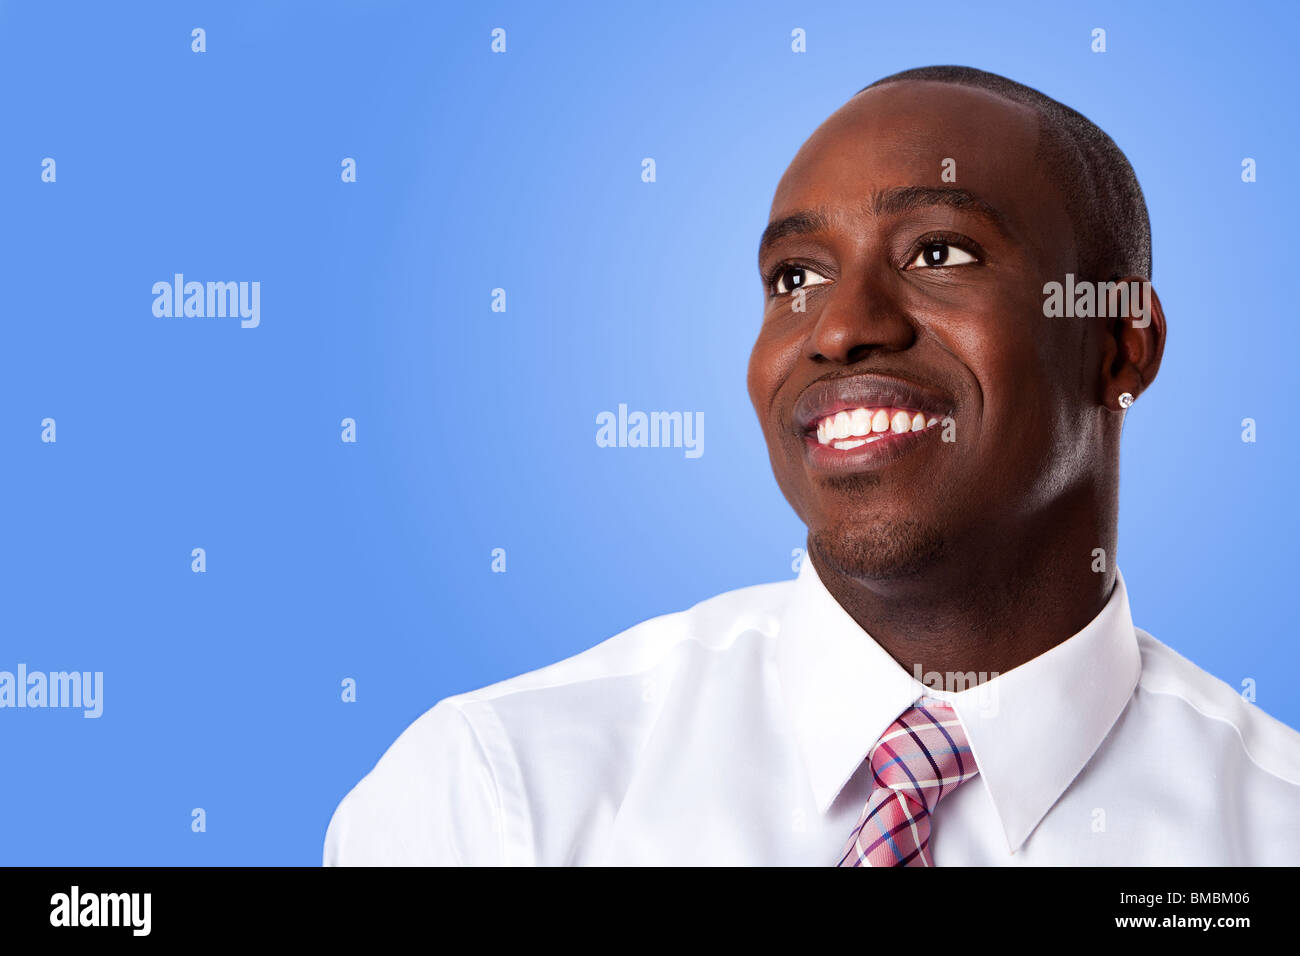 Face of handsome happy African American corporate business man smiling, wearing white shirt and pink with stripes necktie. Stock Photo